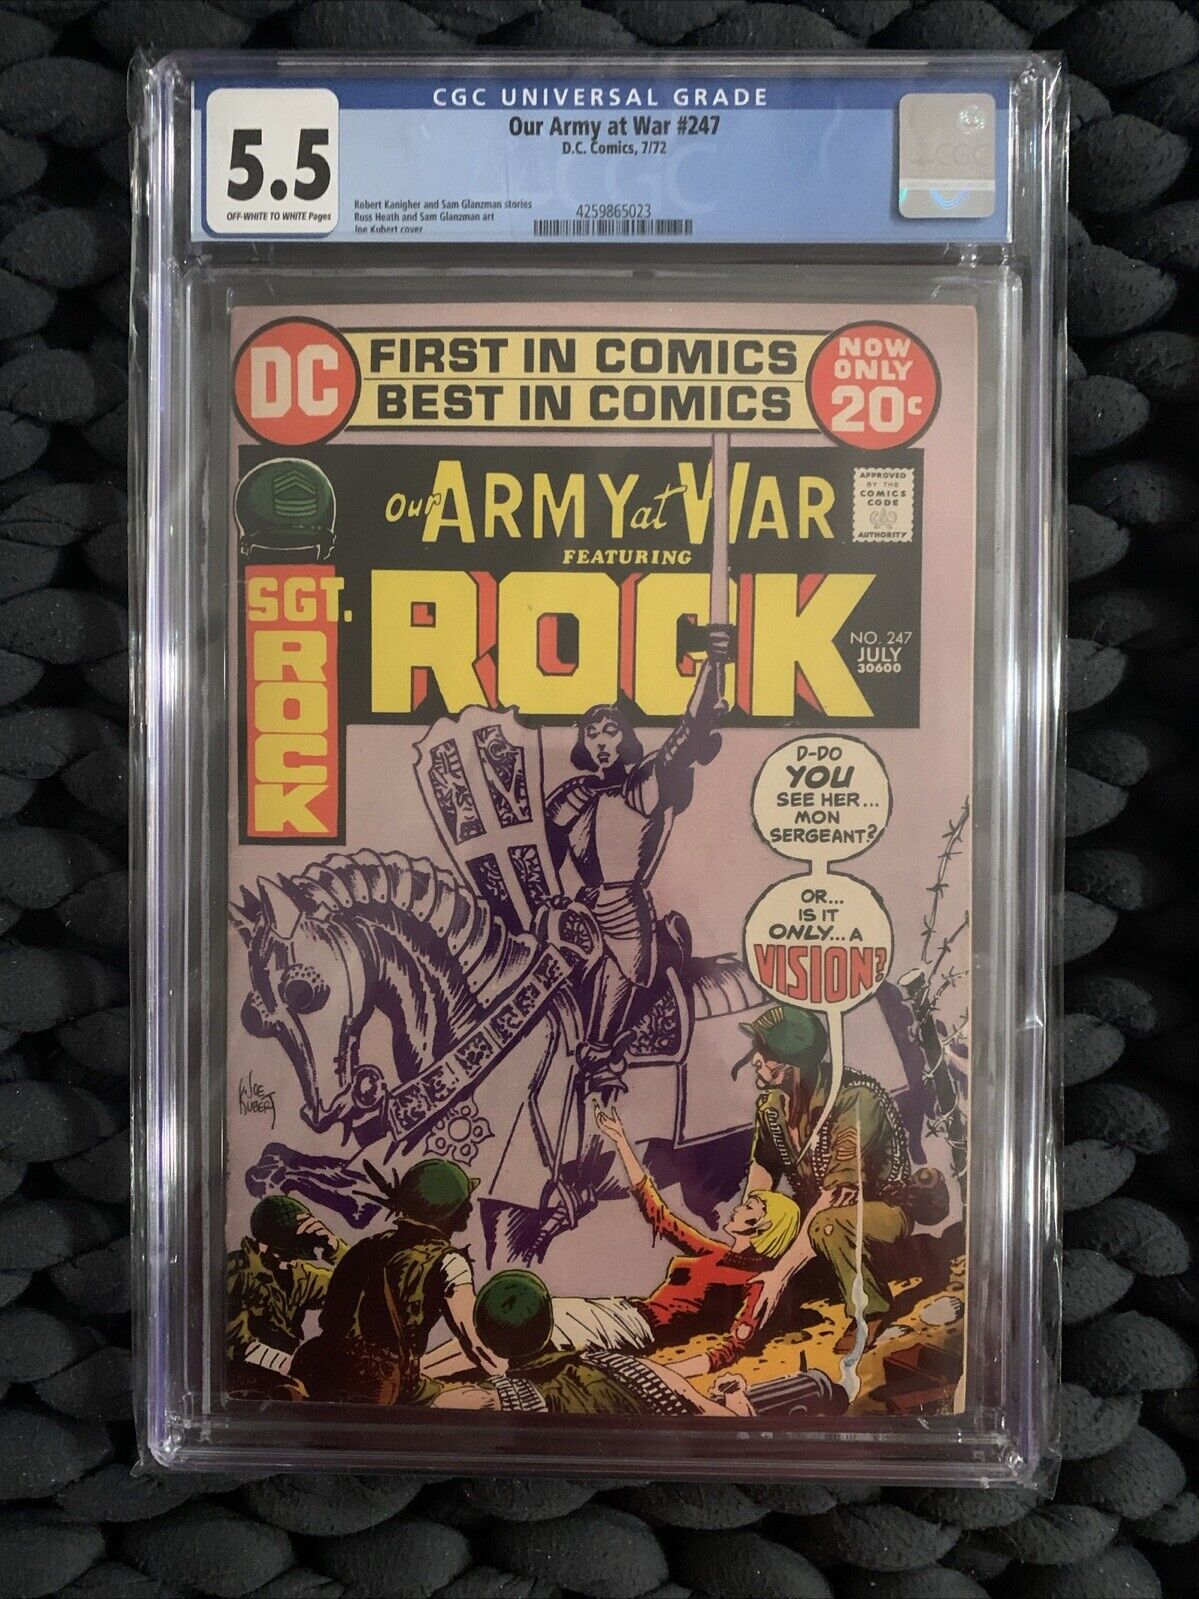 Our Army at War #247 1972 CGC 5.5 Graded (DC Conics, July 1972) Joe Kubert Cover